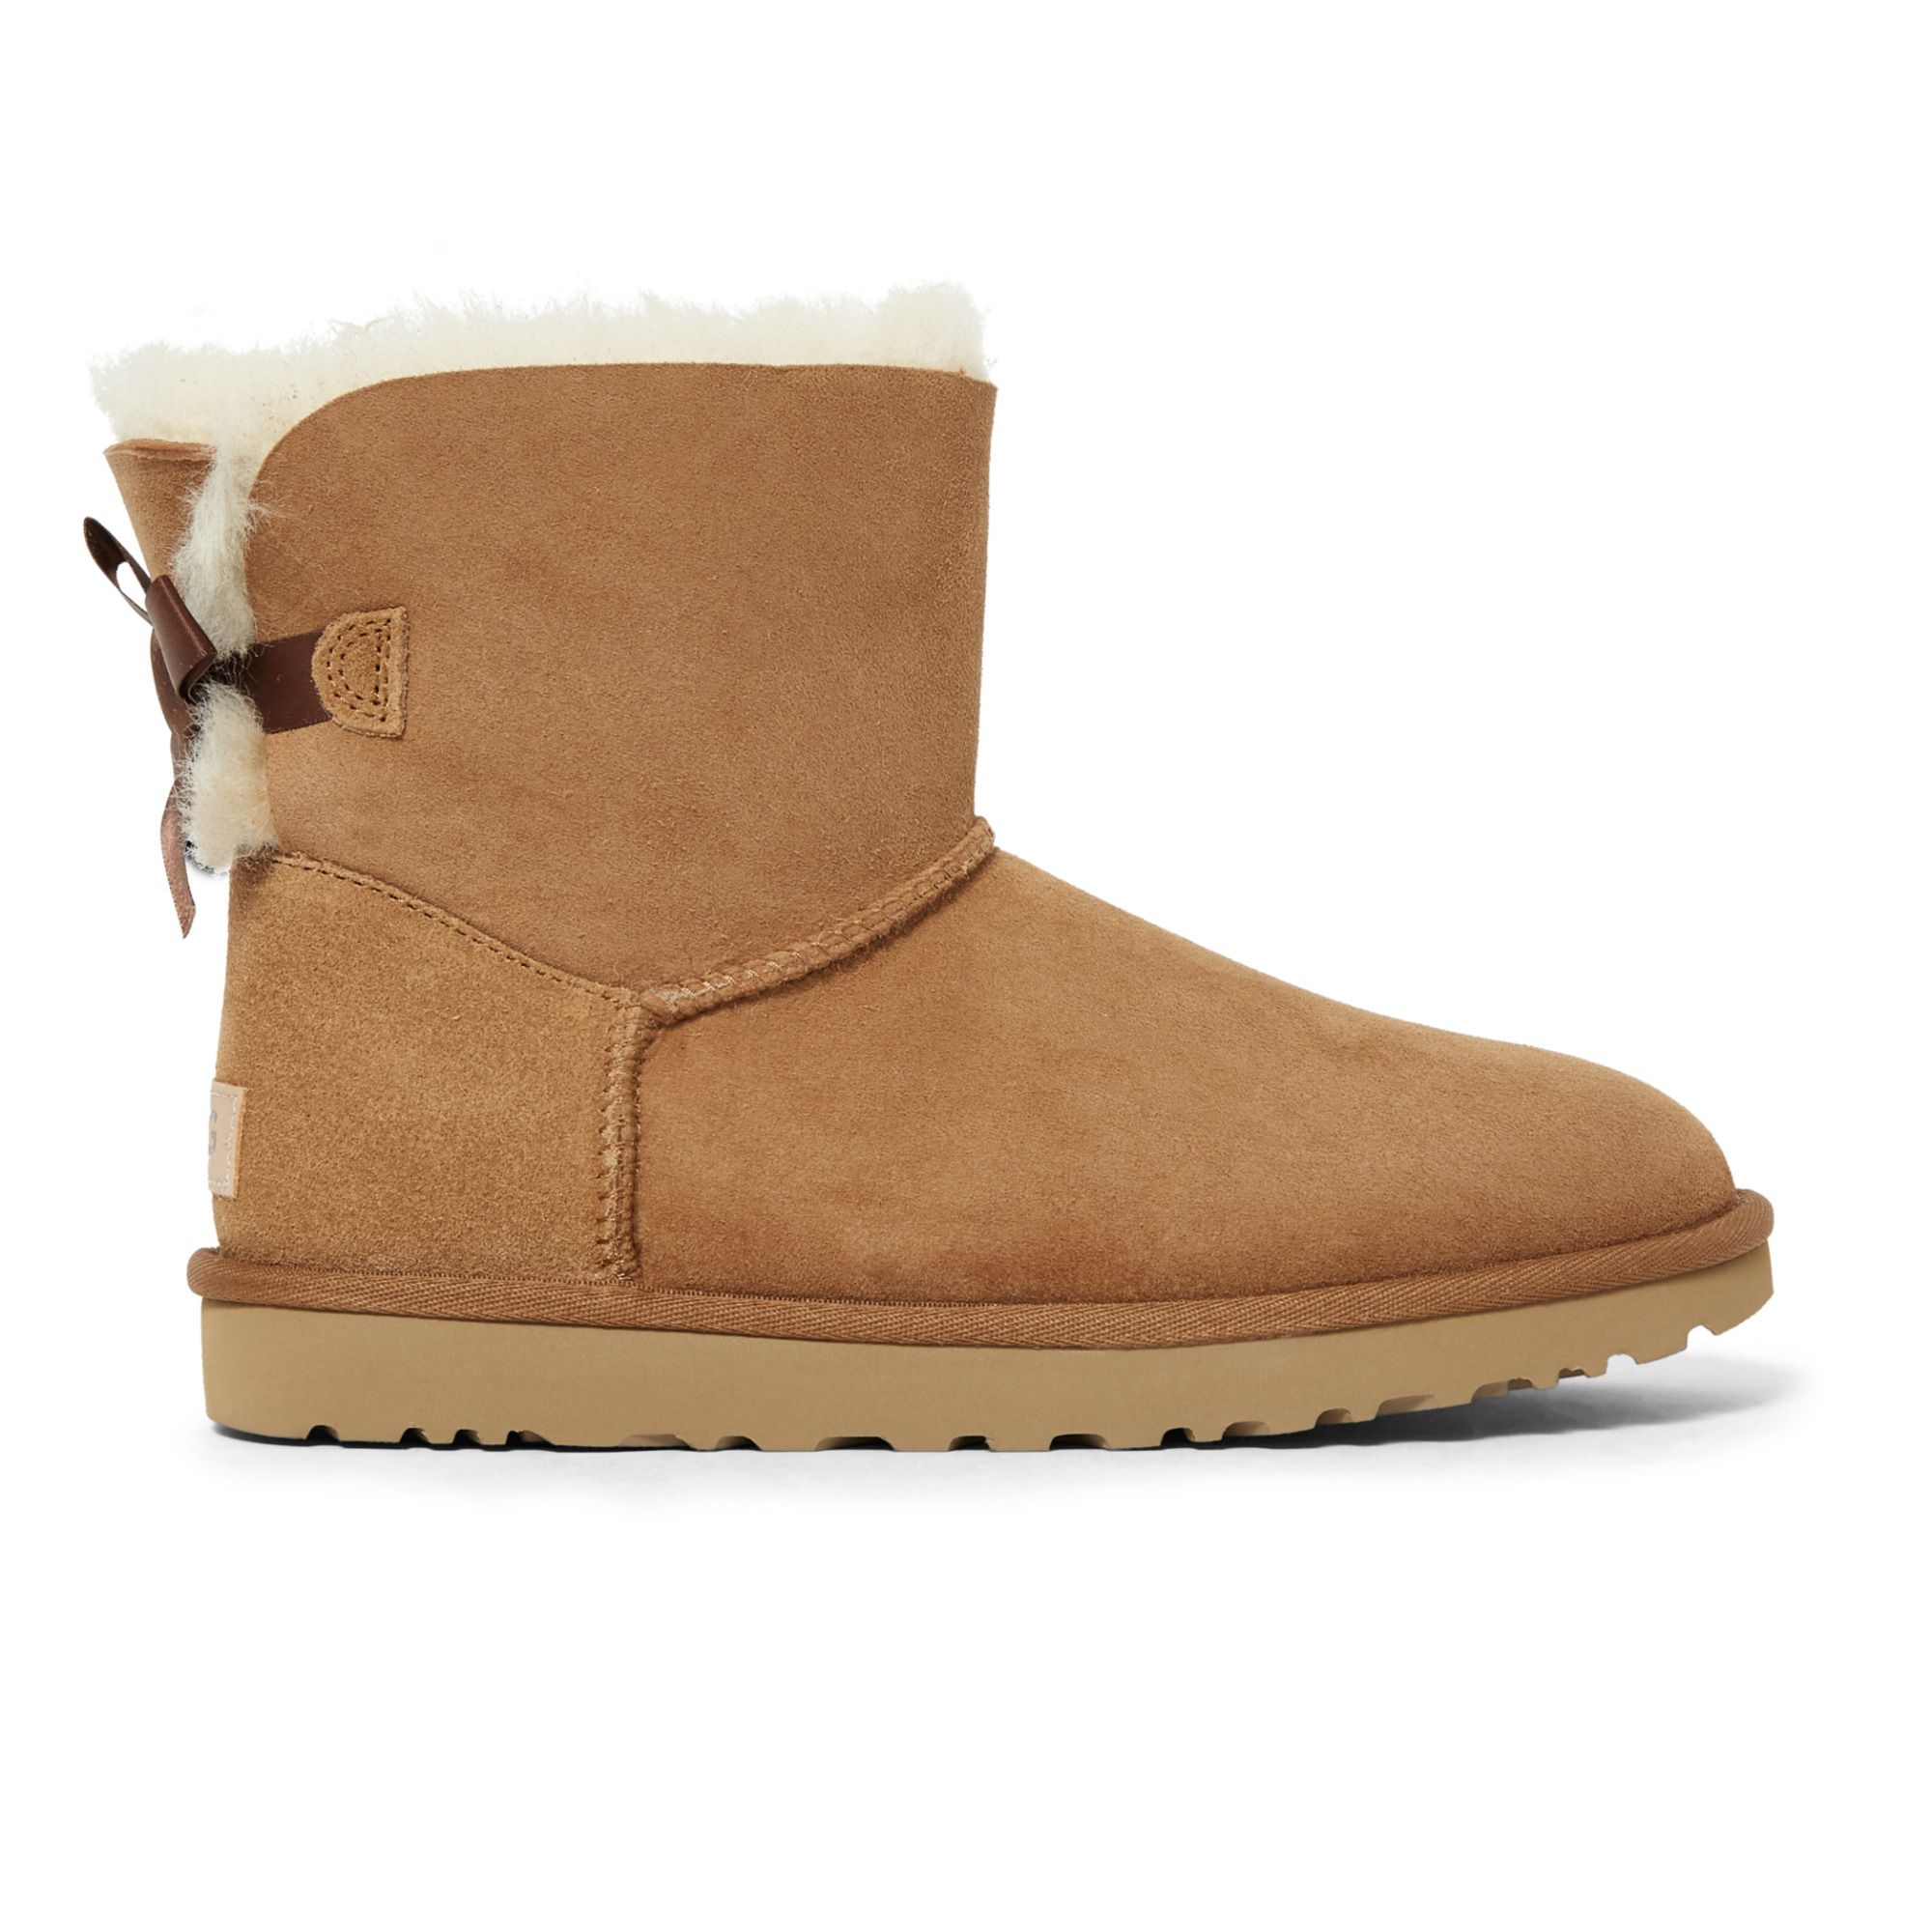 Ugg - Boots Mini Bailey Bow II - Collection Femme - Camel